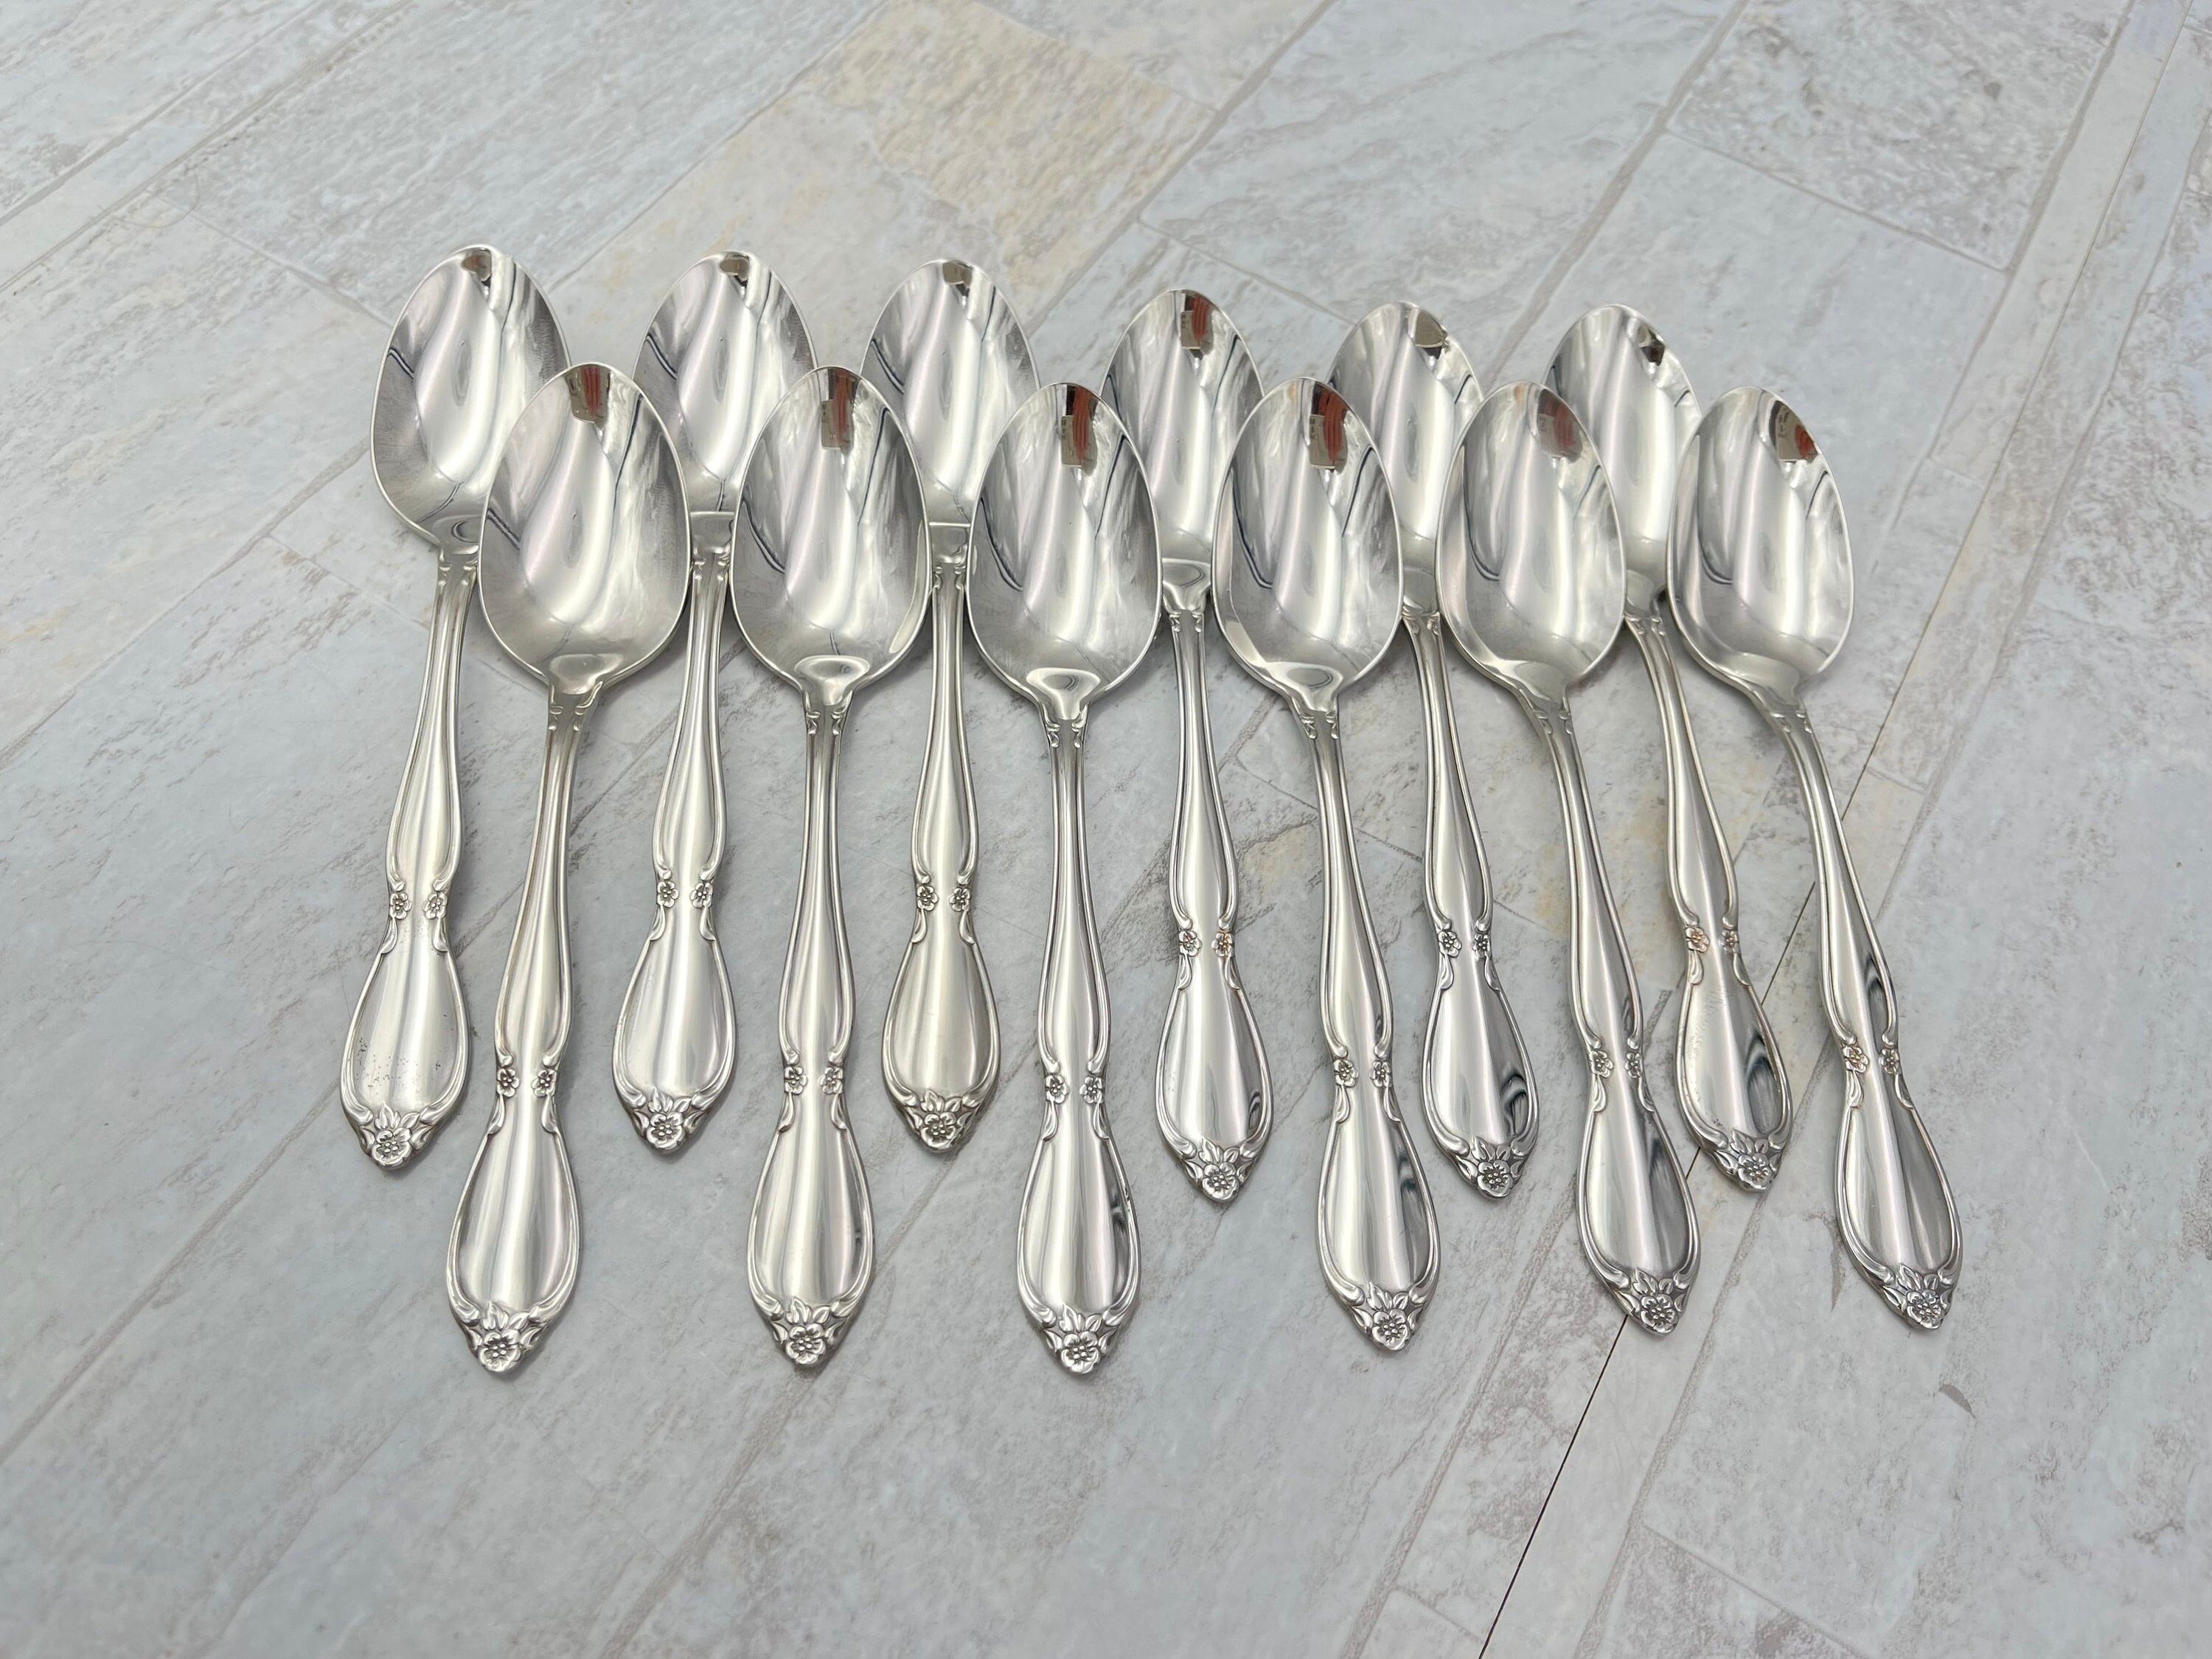 Vintage Flatware Set Oneida Chatelaine Stainless In silverware chest,  Service for 8 Excellent Condition, Wedding Gift